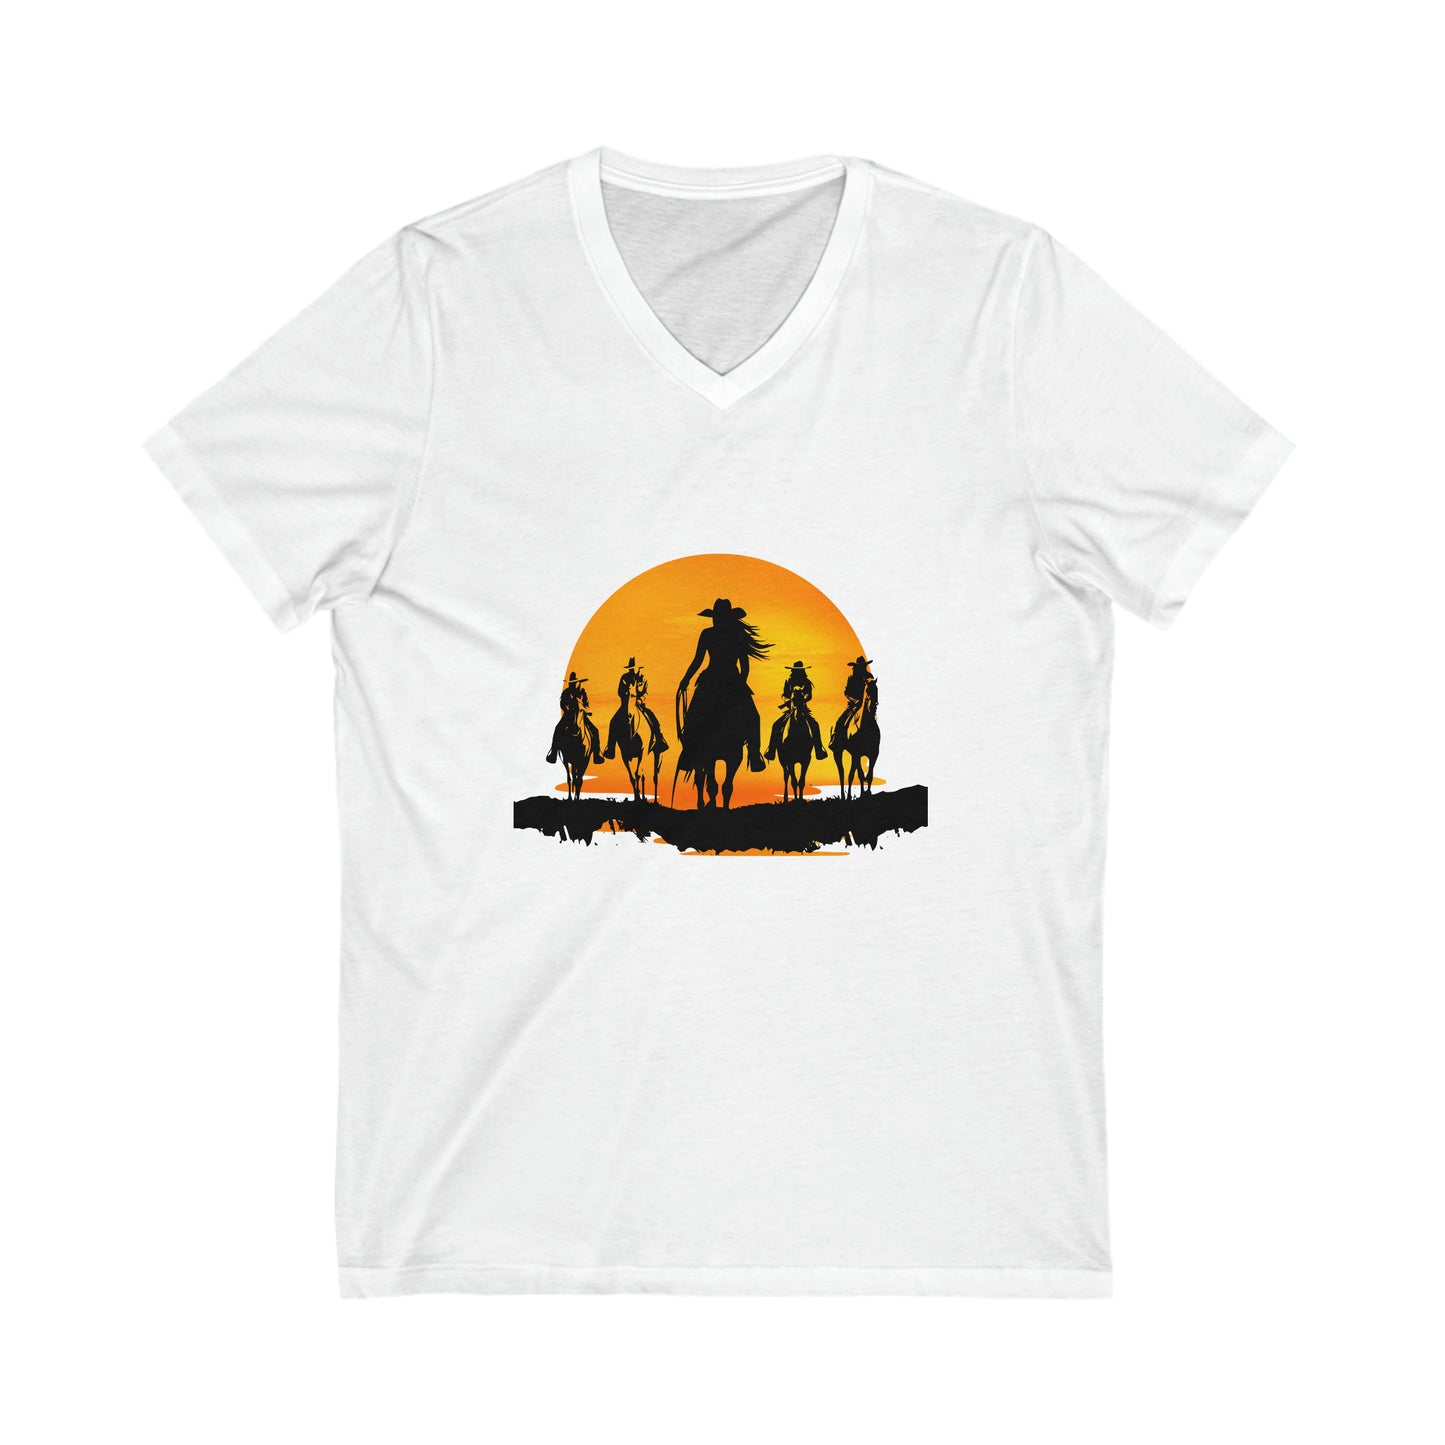 Ladies cowgirls in the sunset - Unisex Jersey Short Sleeve V-Neck Tee